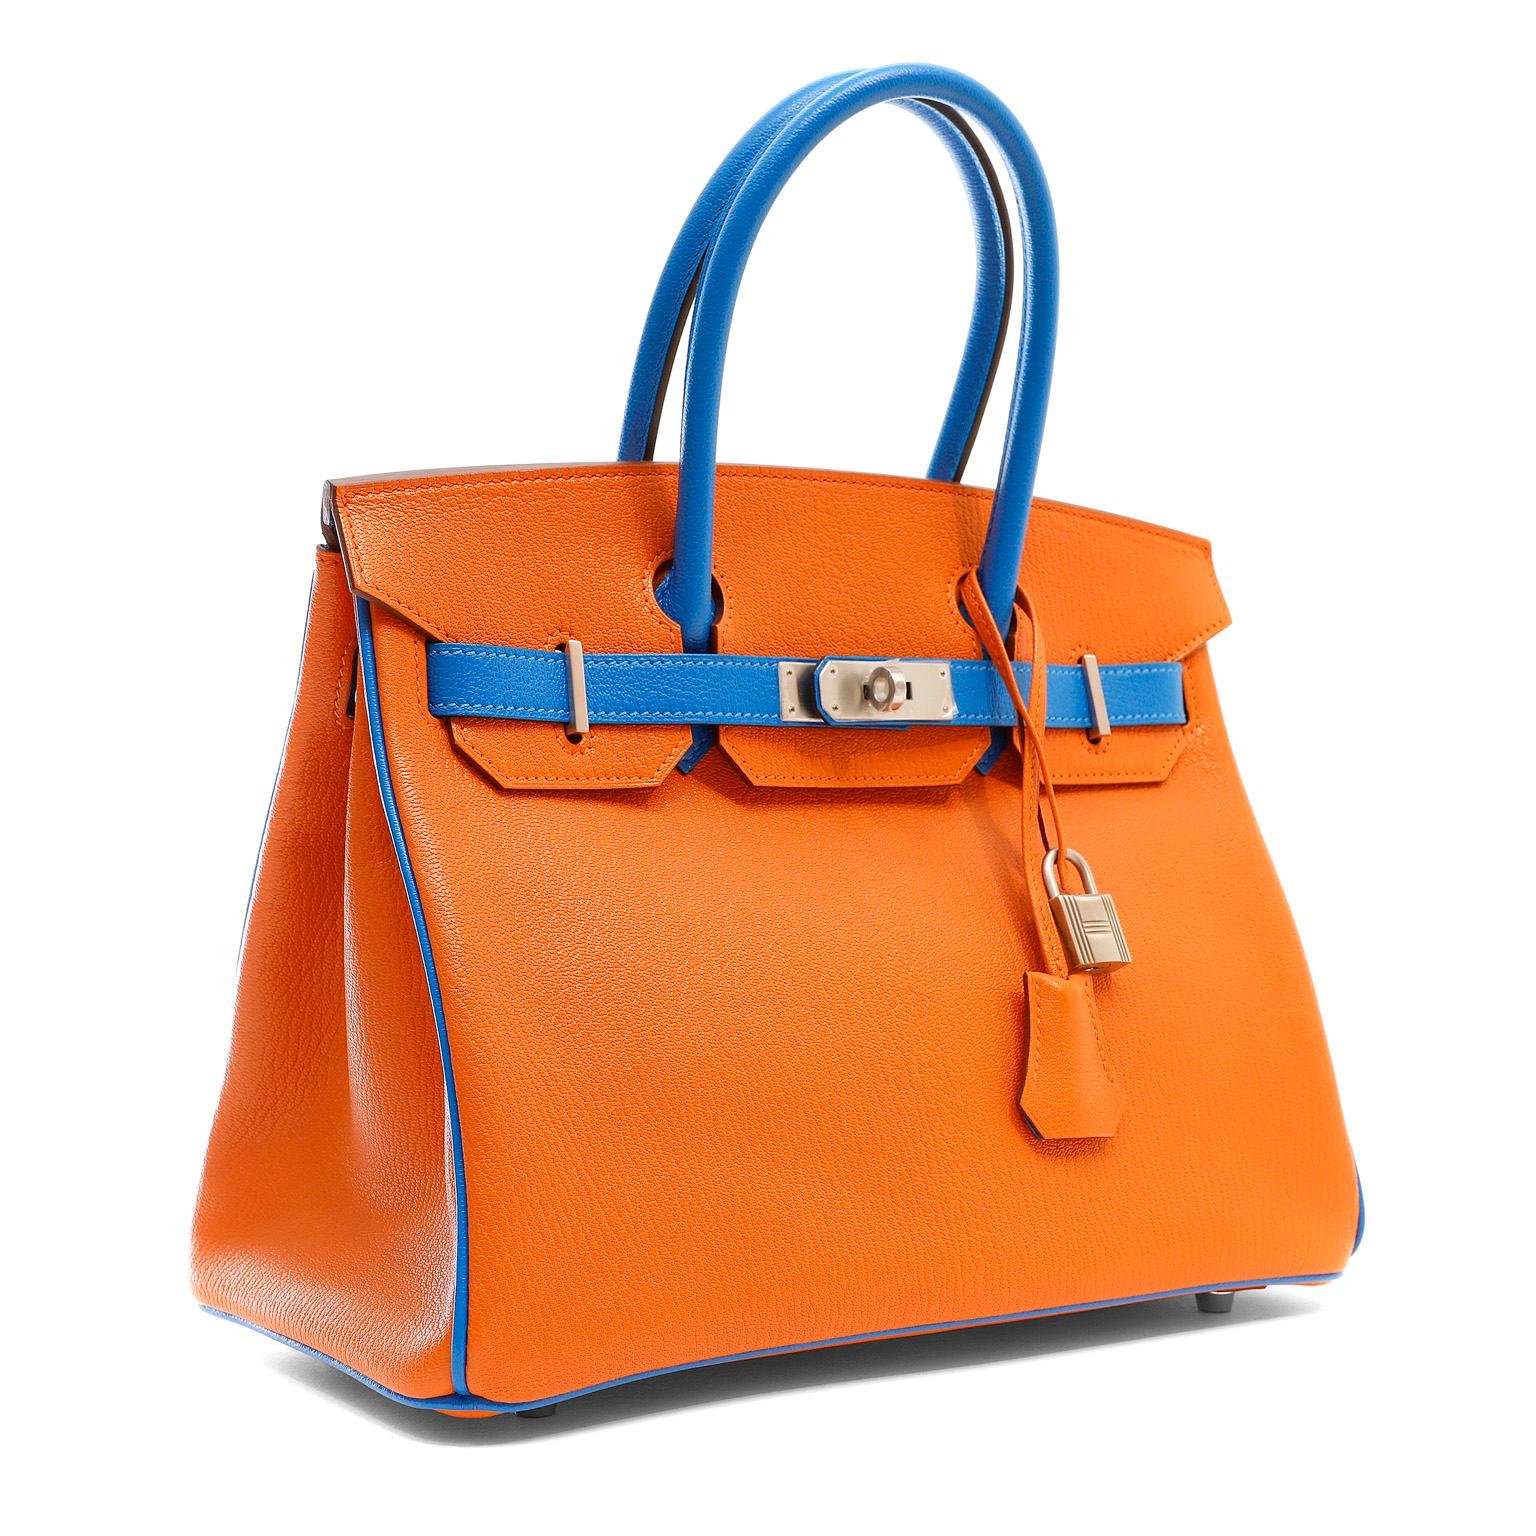 This authentic Hermès Orange and Blue Horseshoe Chevre 30 cm Birkin is in pristine condition with the protective plastic on the specially ordered bushed Palladium hardware.  This combination is a special order, denoted by the horseshoe symbol on the